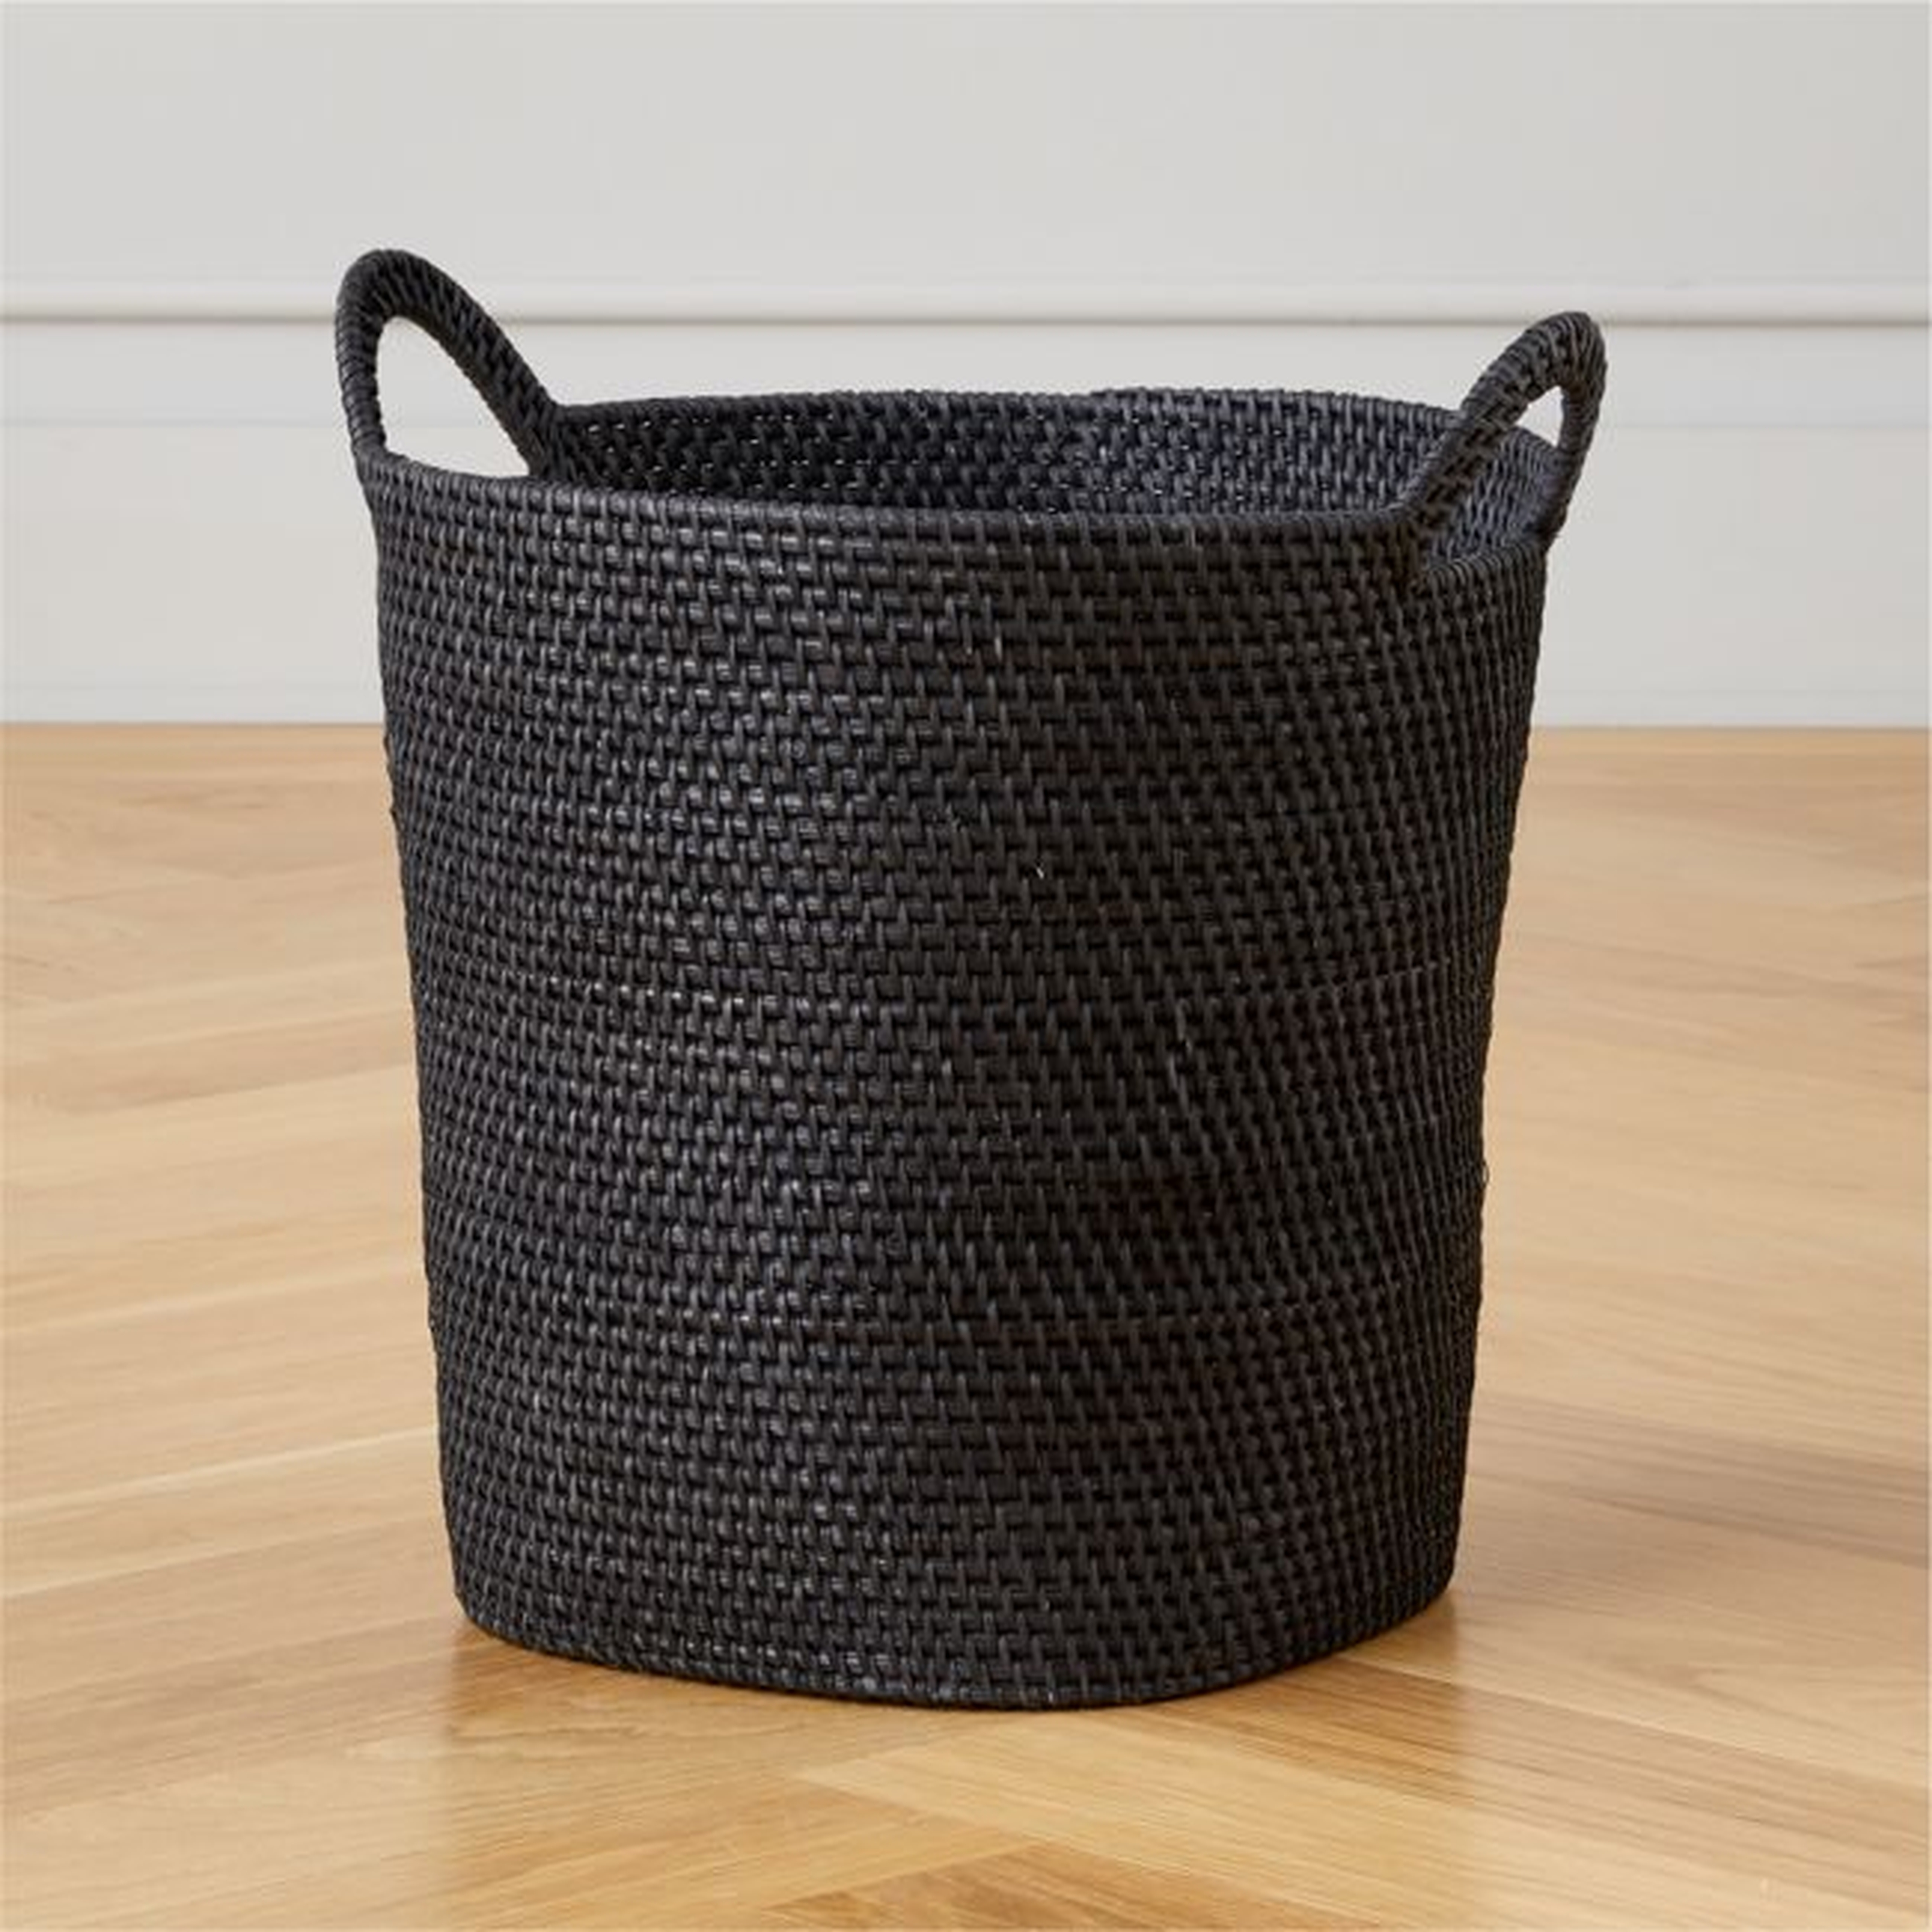 Jazz Basket with Handles, Small, Black - CB2